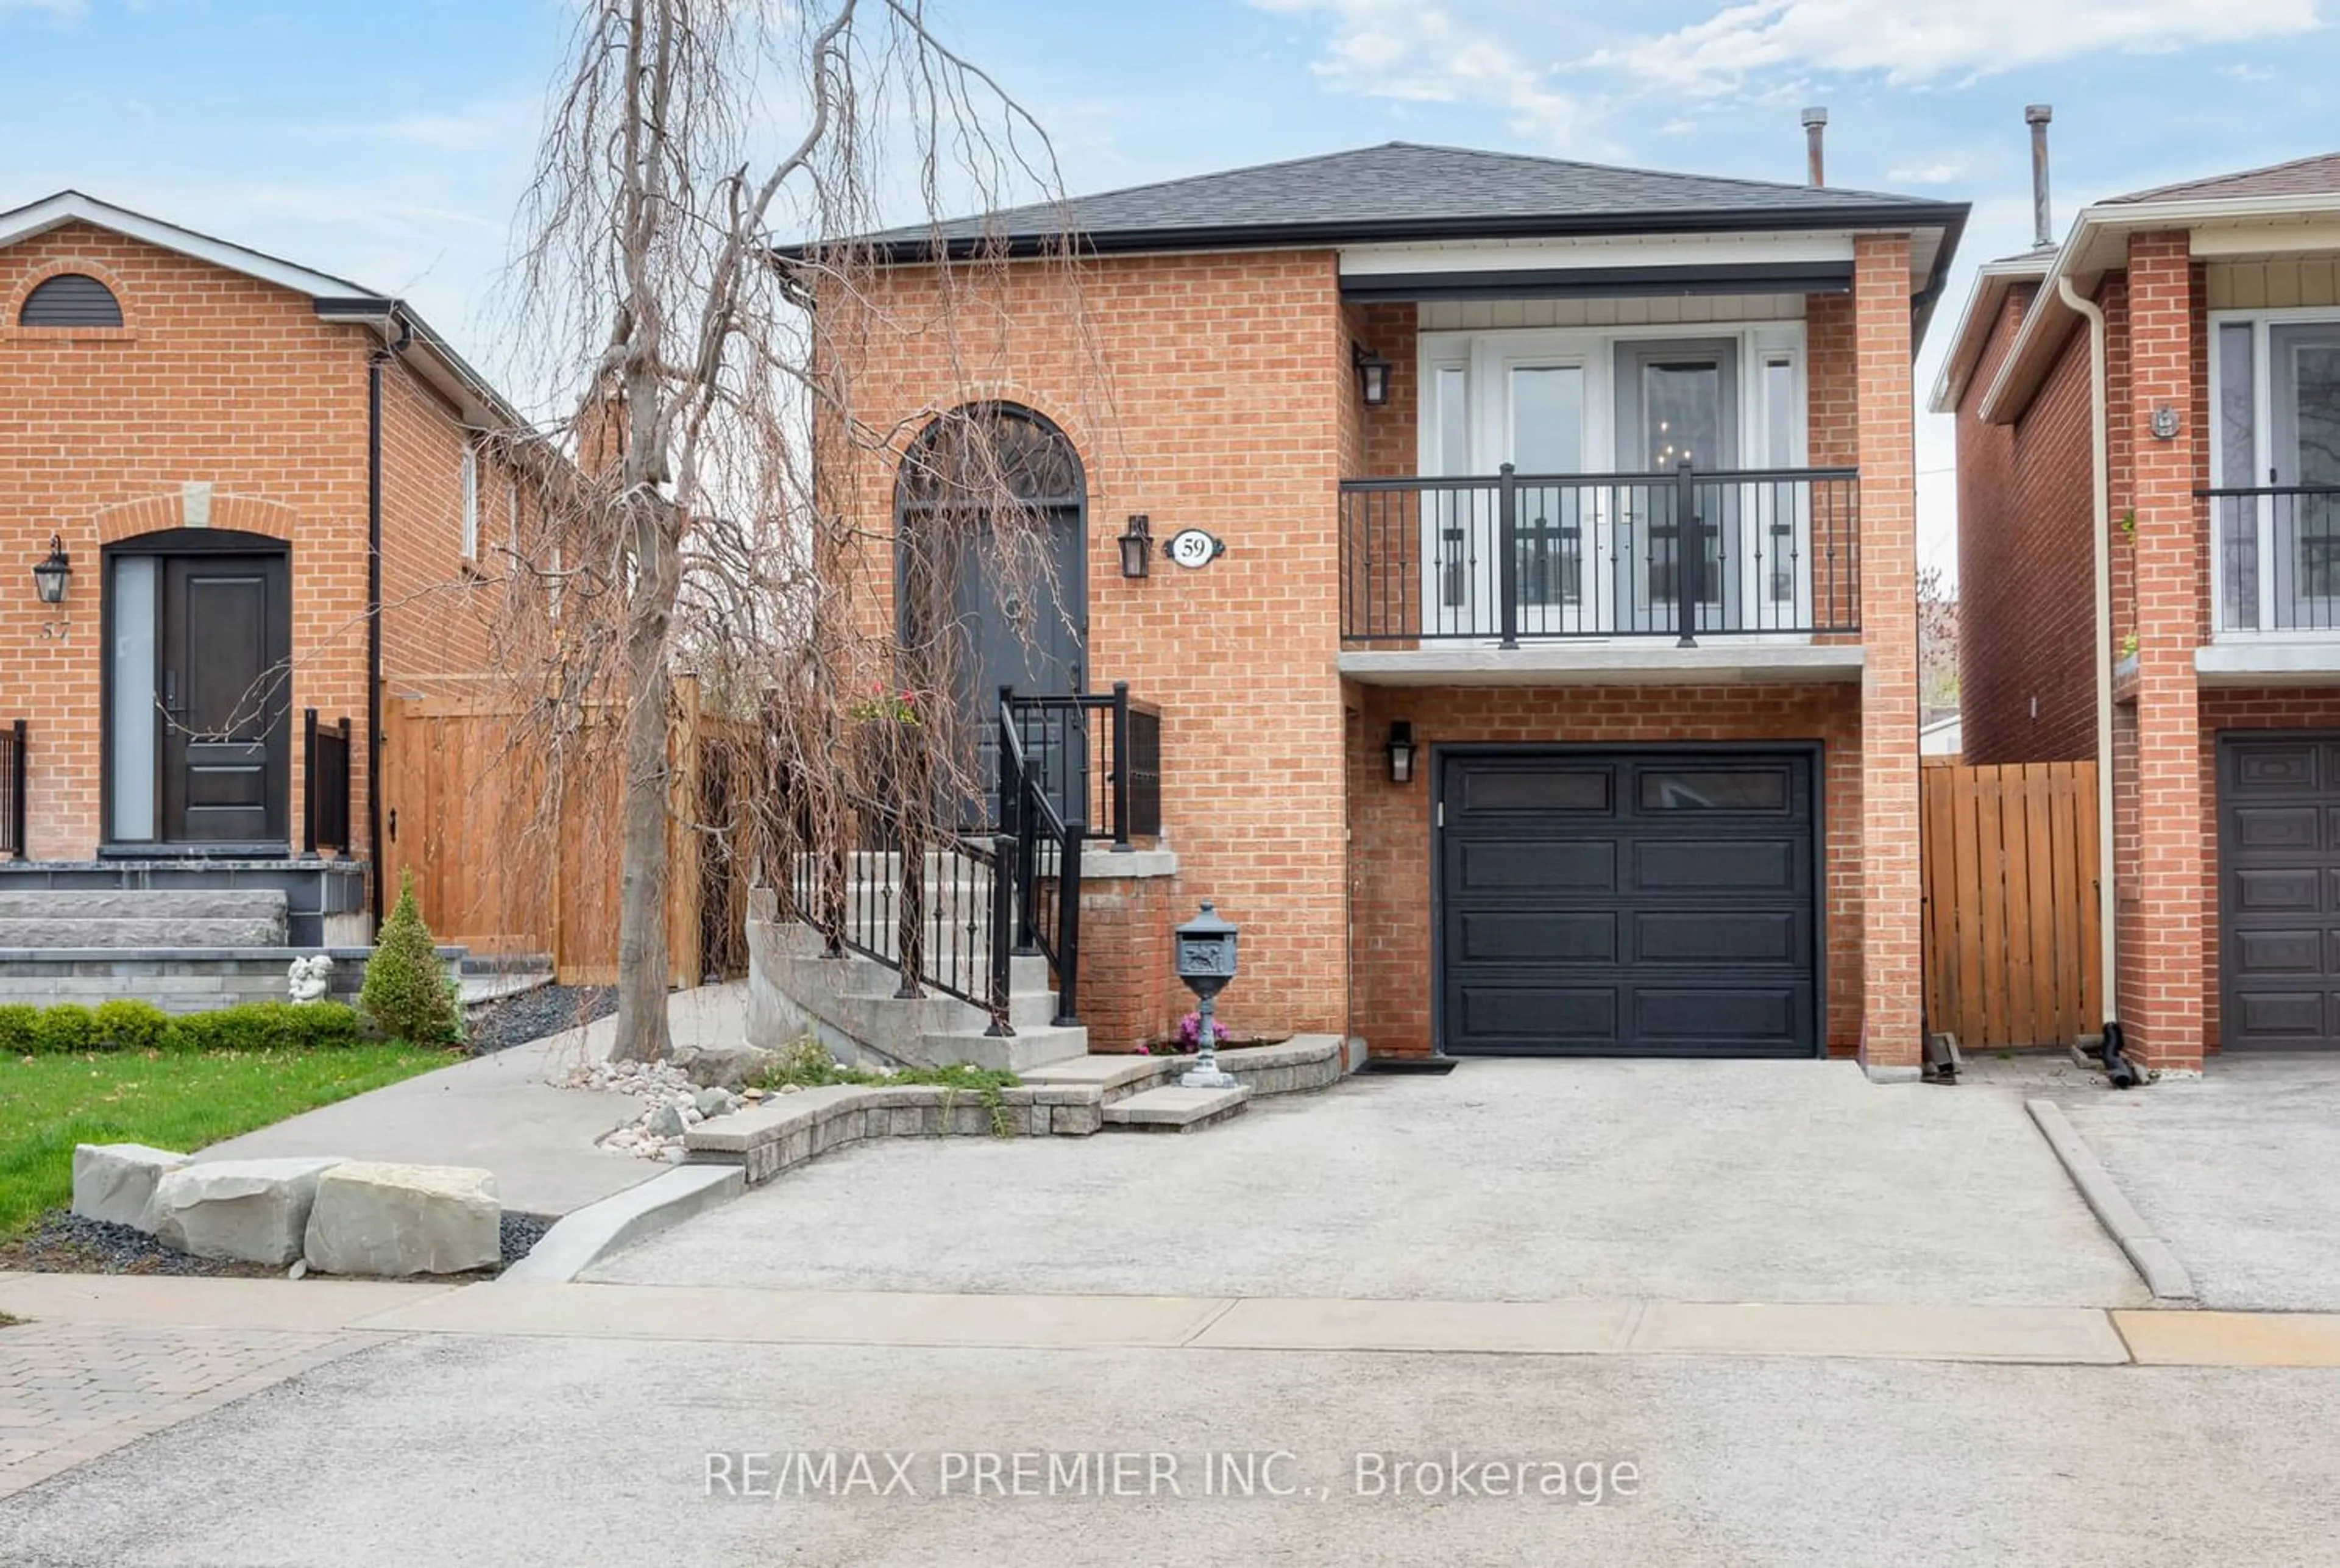 Home with brick exterior material for 59 Terra Rd, Vaughan Ontario L4L 3J4